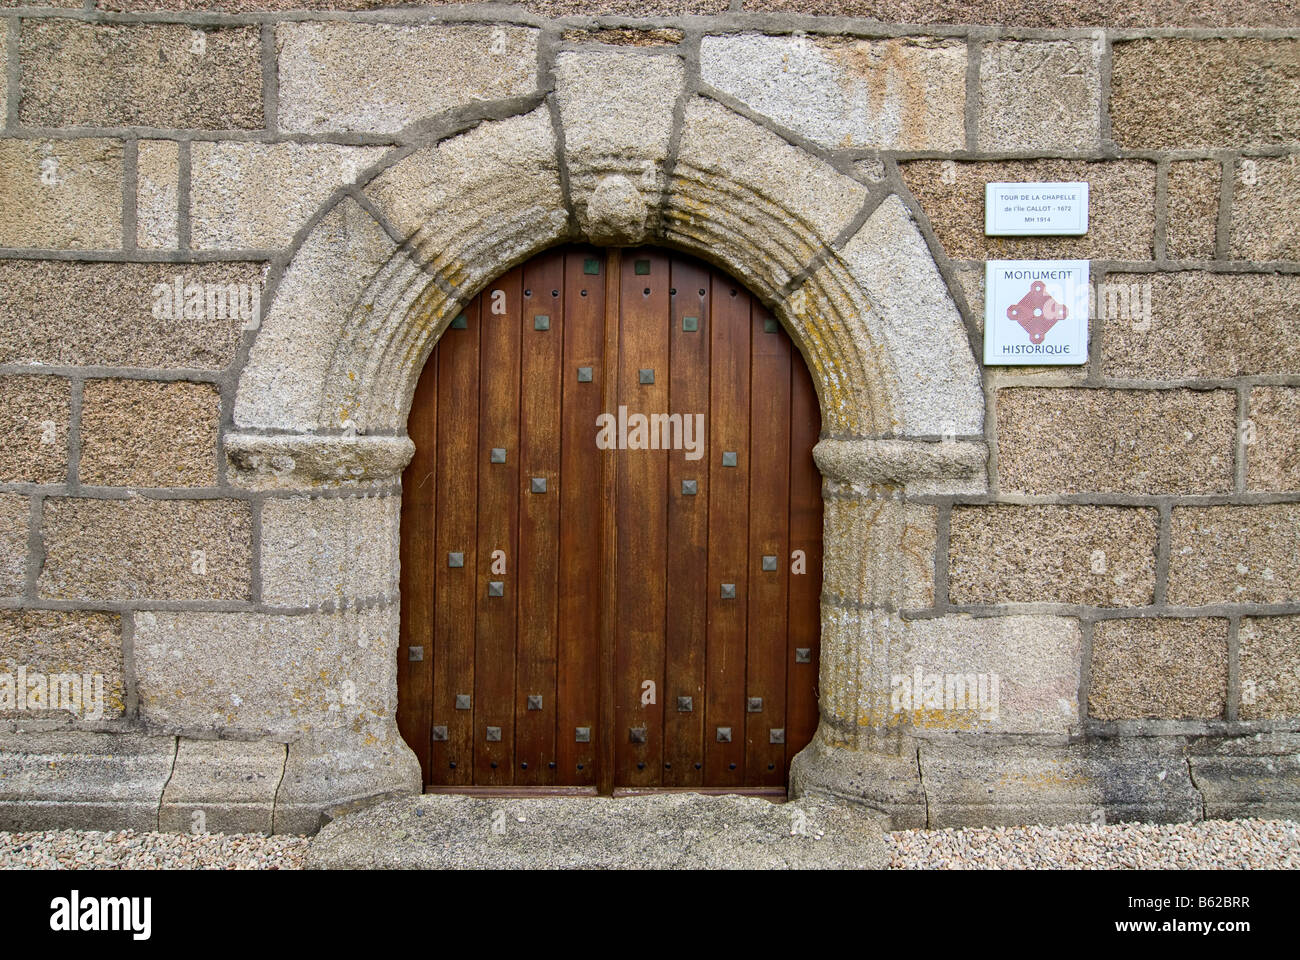 Entrance to the Chapel on the Ile Callot, Historical Monument, Bretagne, Brittany, France, Europe Stock Photo